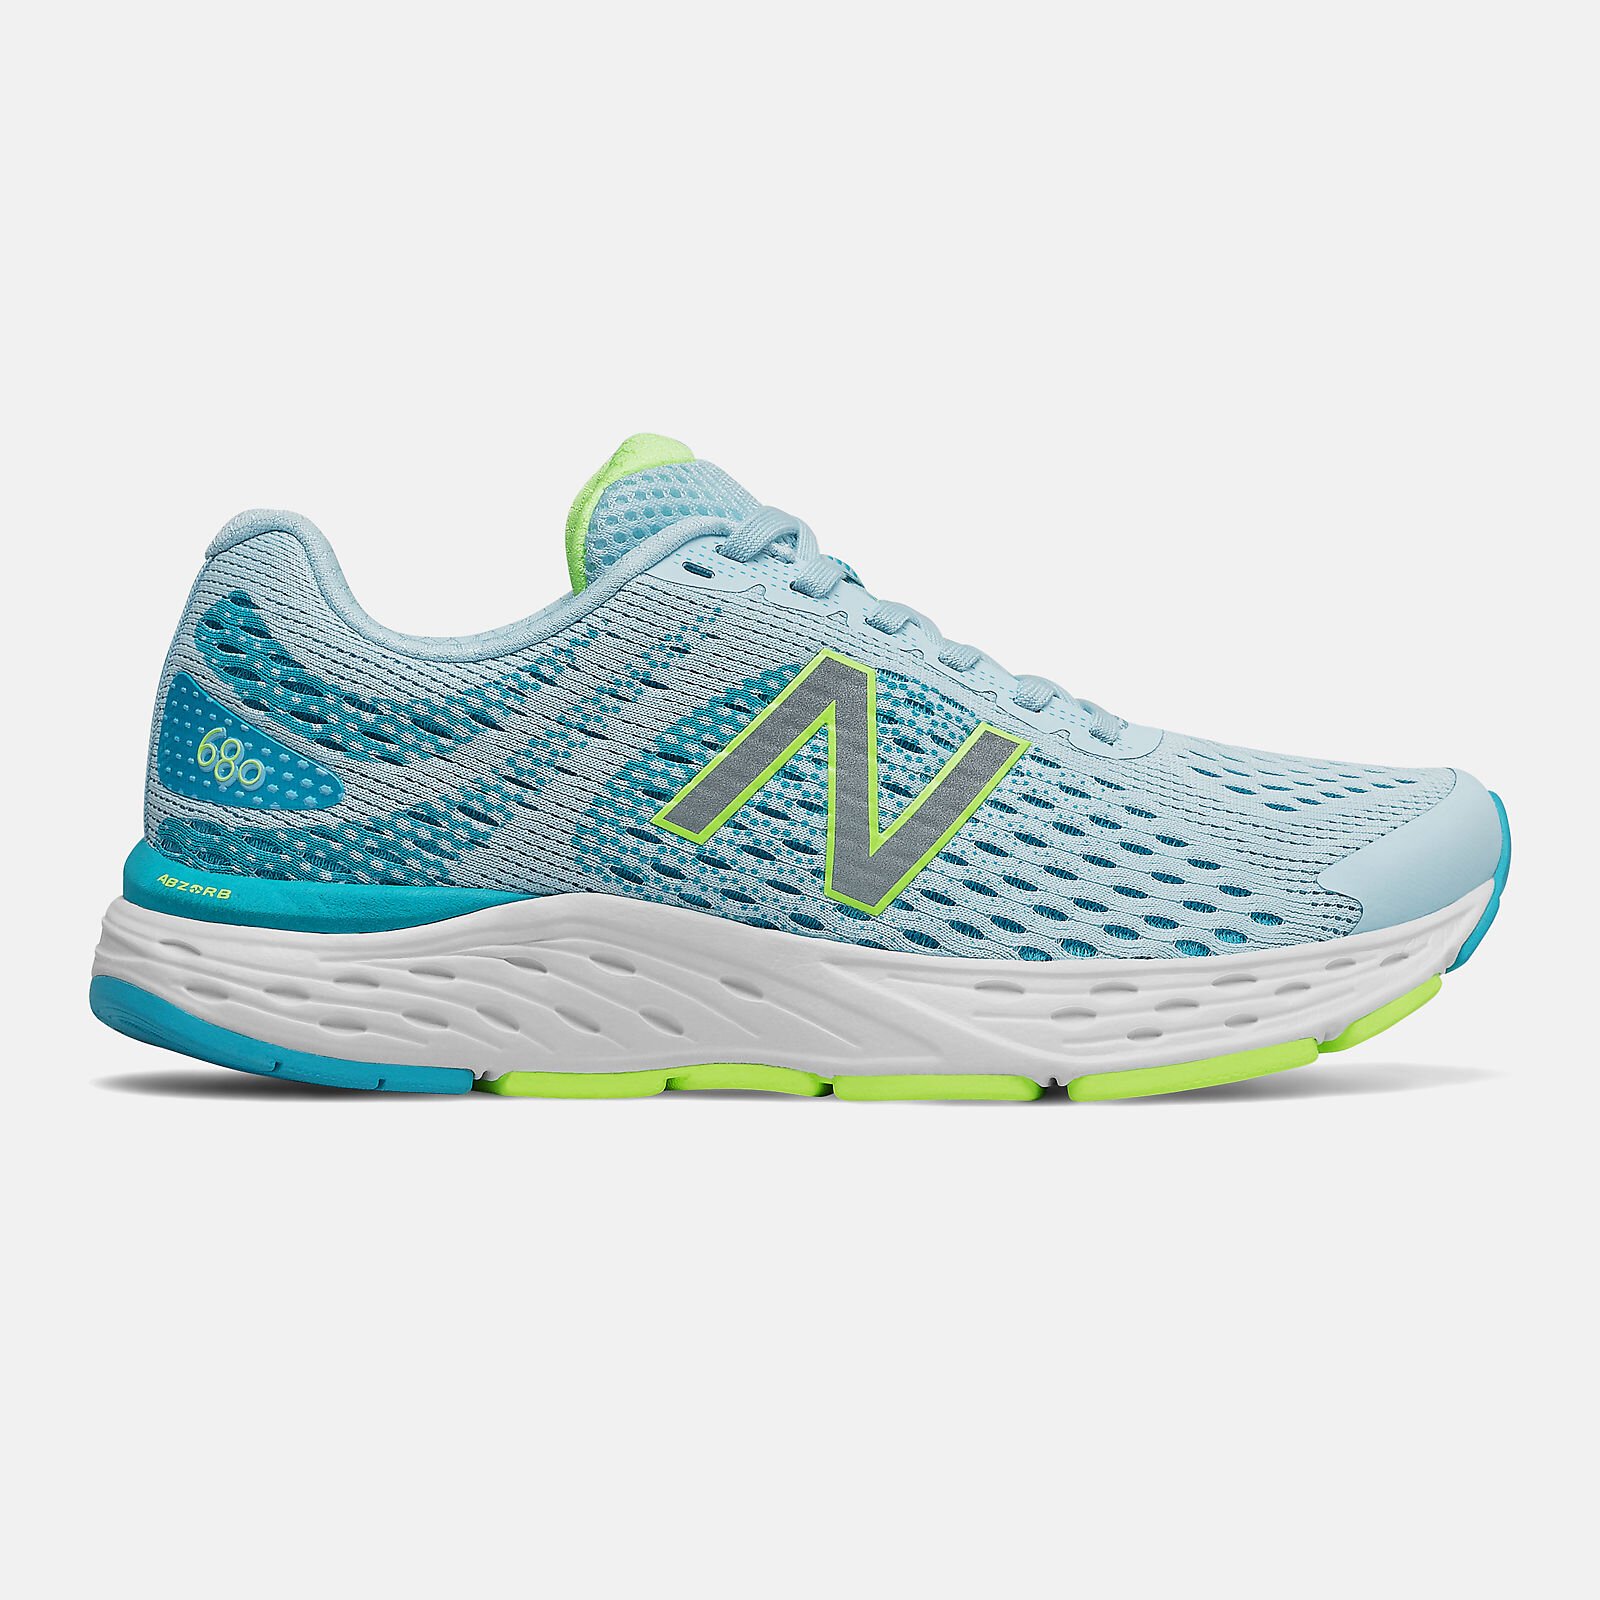 new balance shoes online